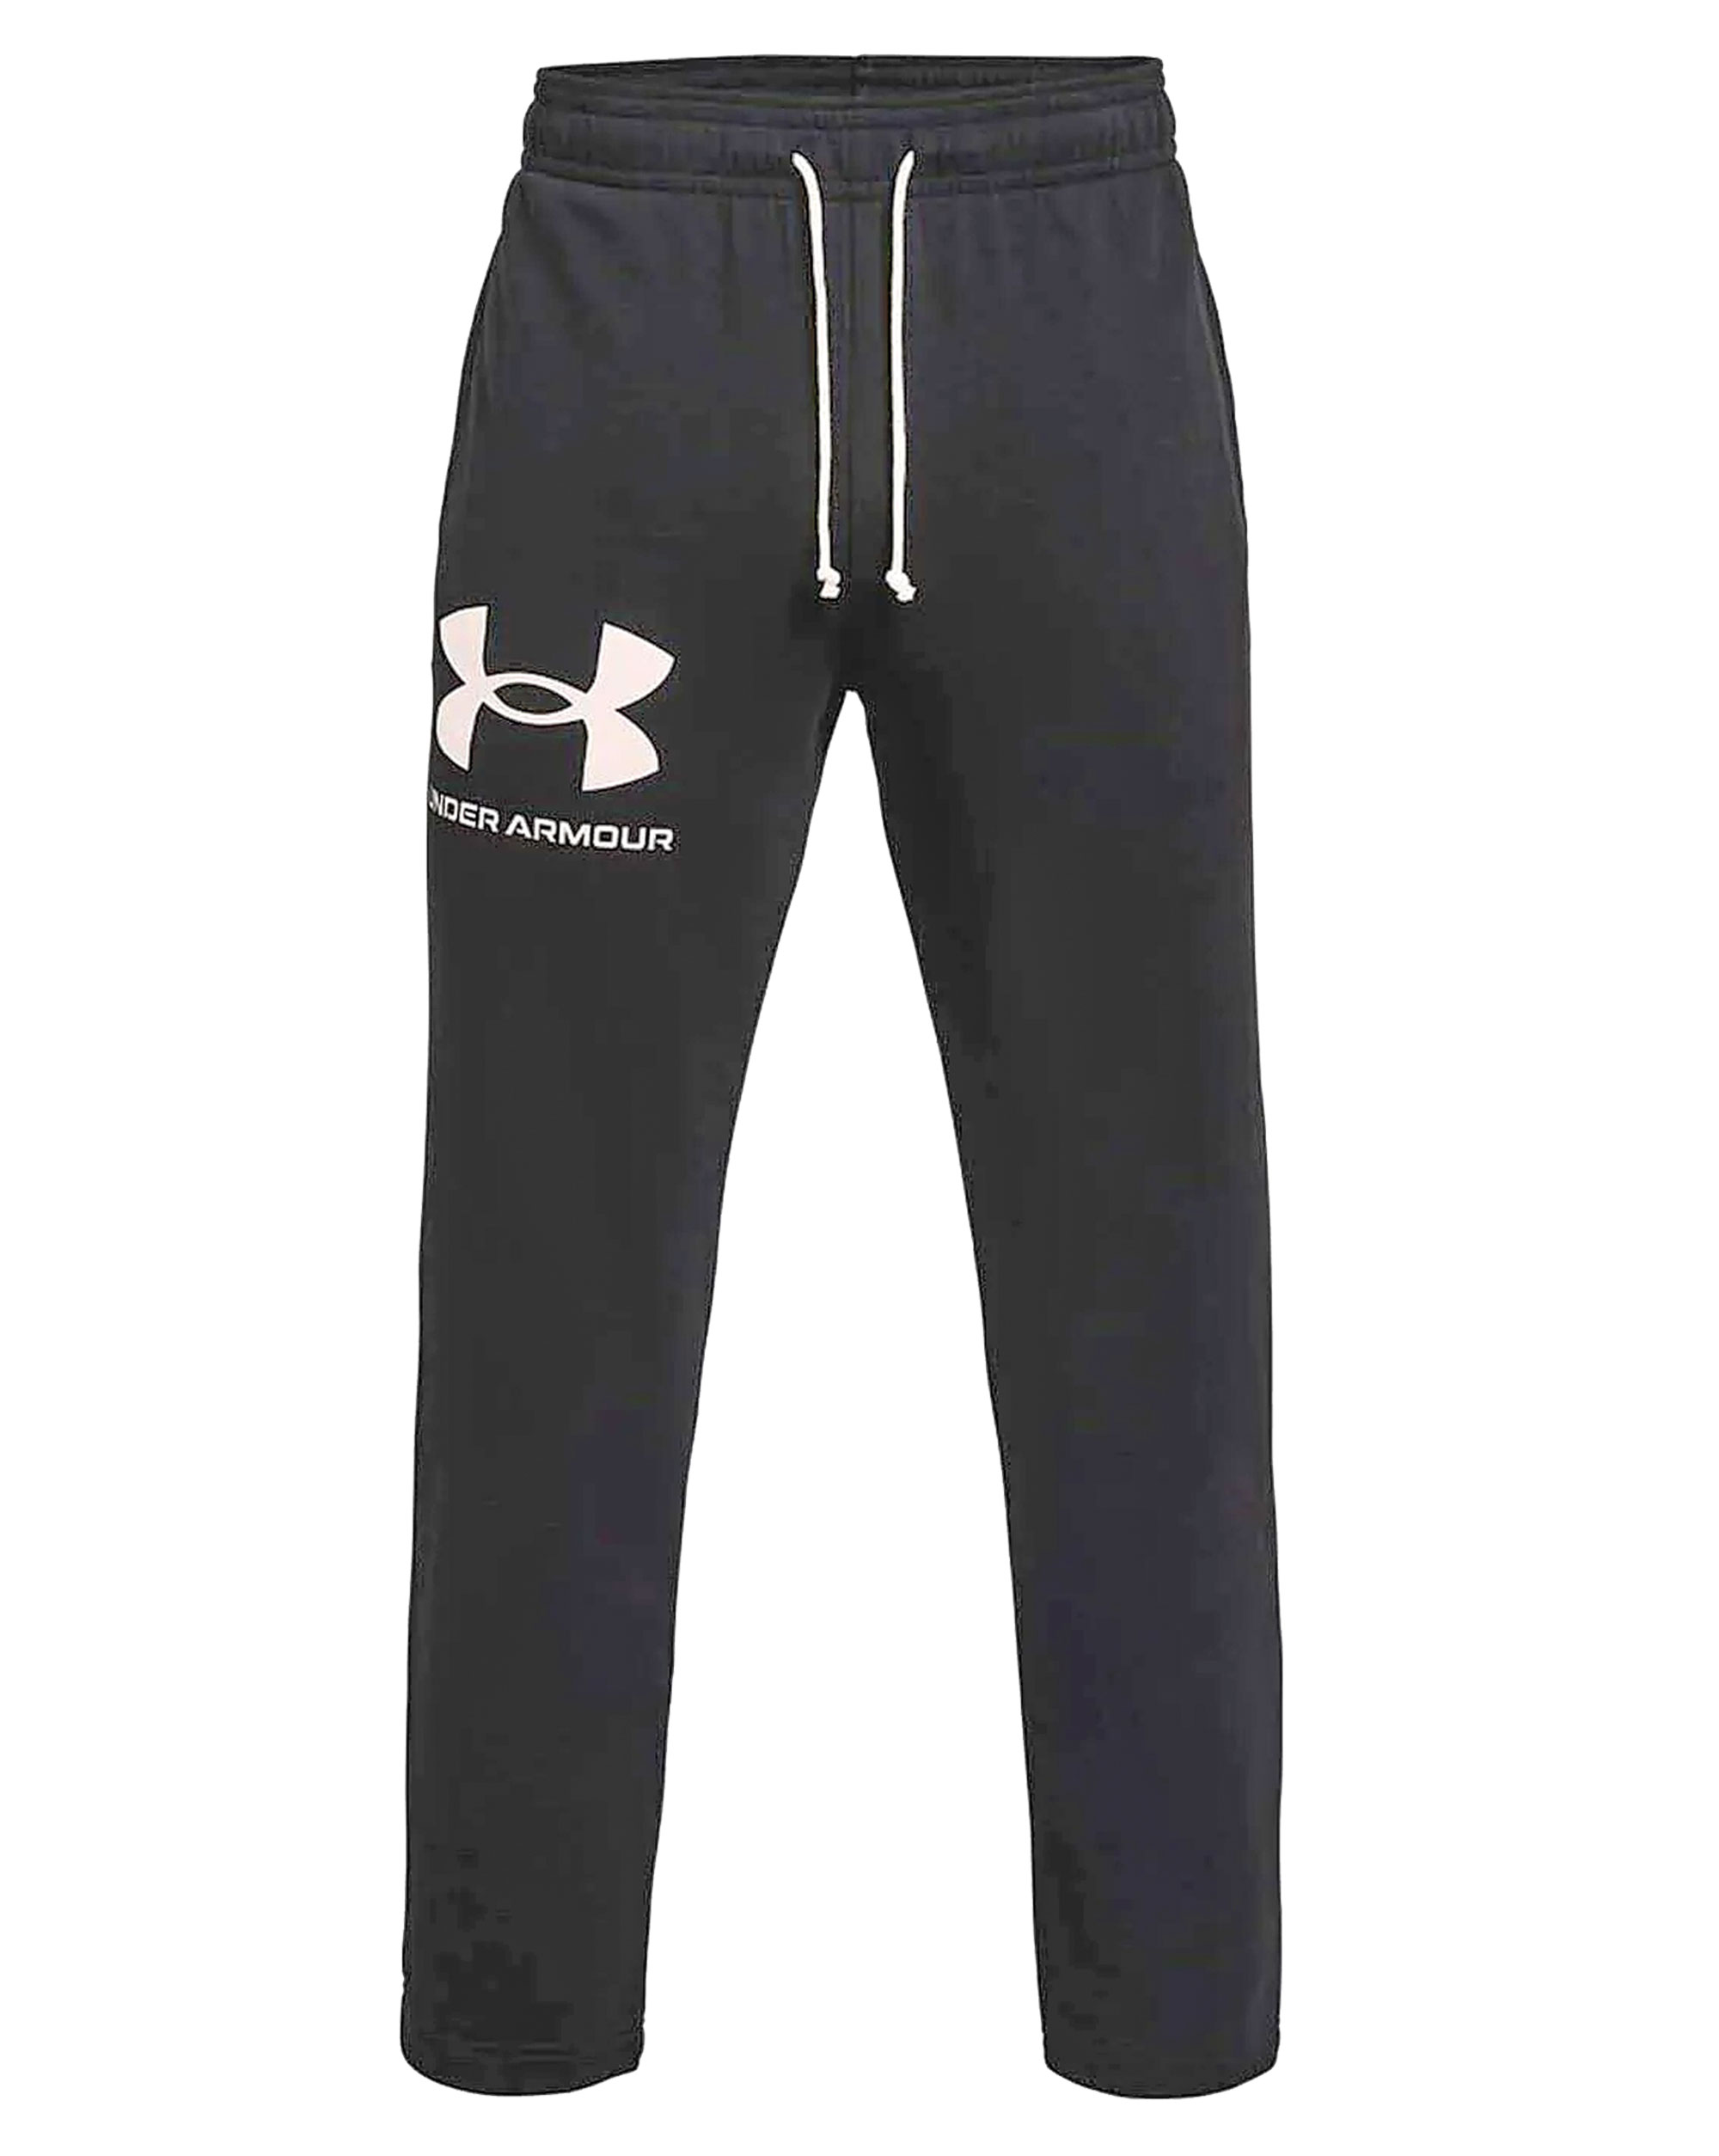 Under Armour Men\'s Rival AMP Sweatpants French Terry | Recon Company